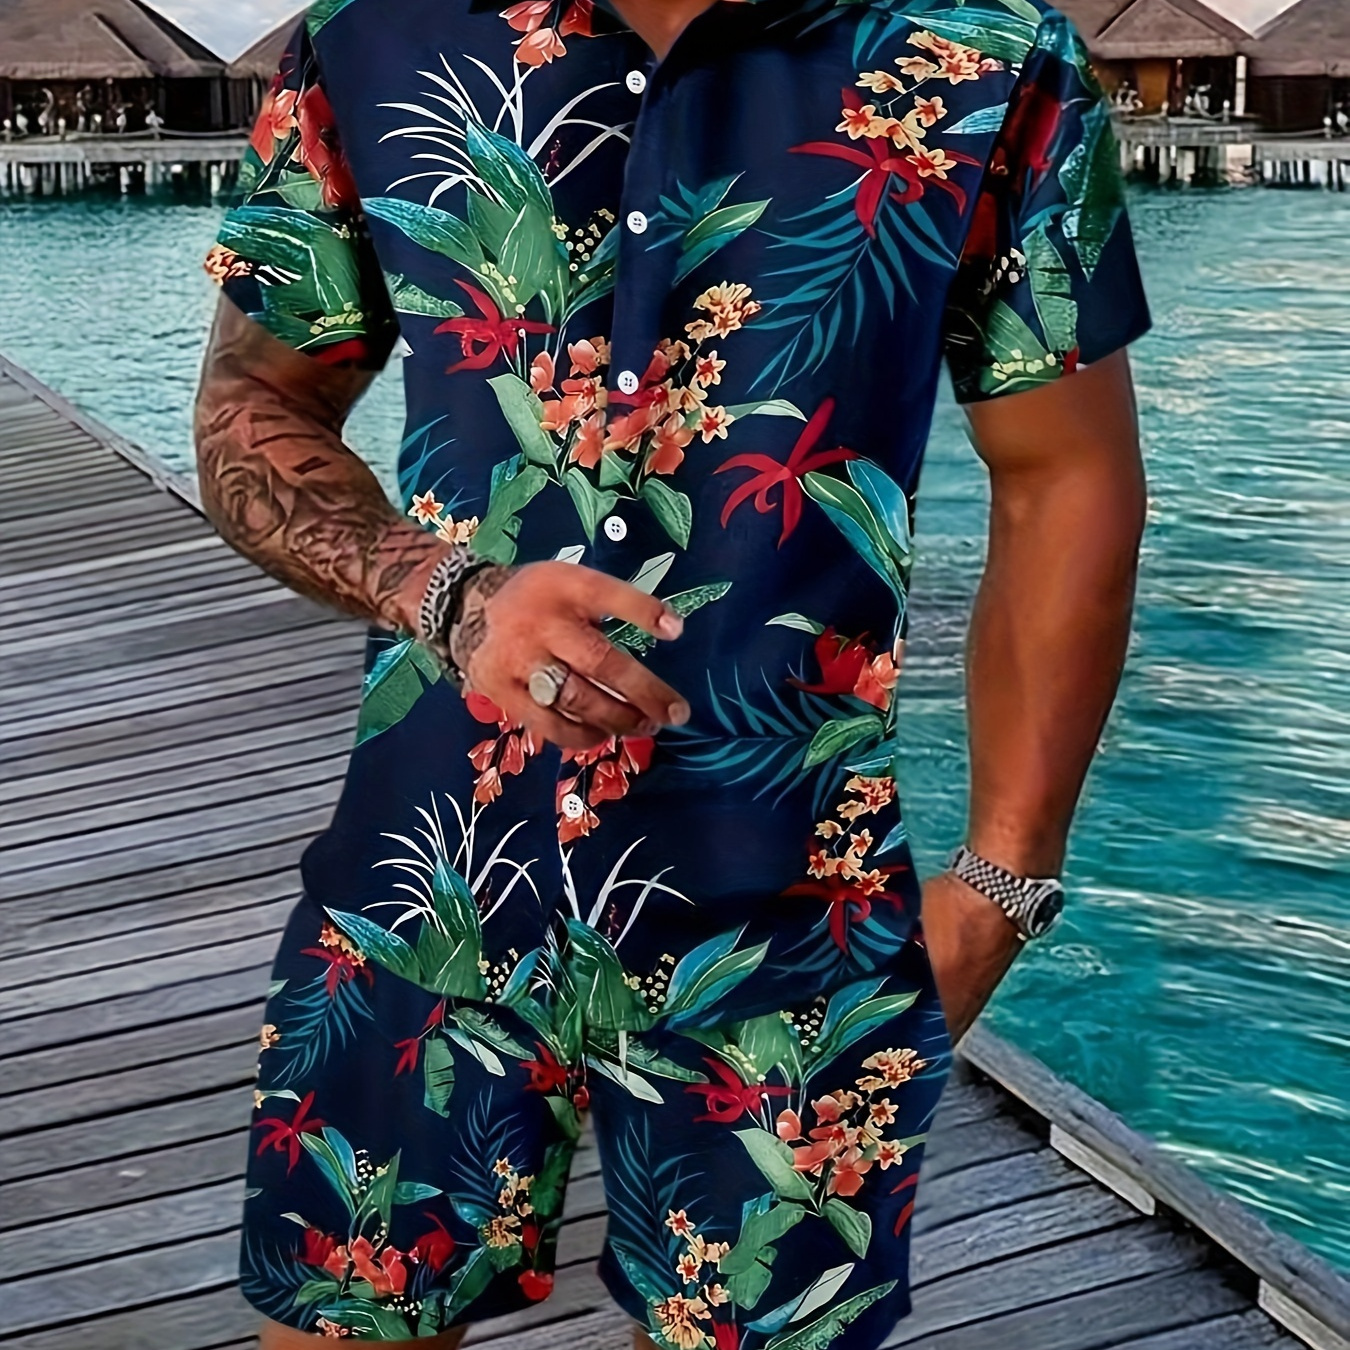 

Floral & Leaf Print, Men's 2pcs Outfits, Casual Camp Collar Lapel Button Up Short Sleeve Shirts Hawaiian Shirt And Shorts Set For Summer, Men's Clothing